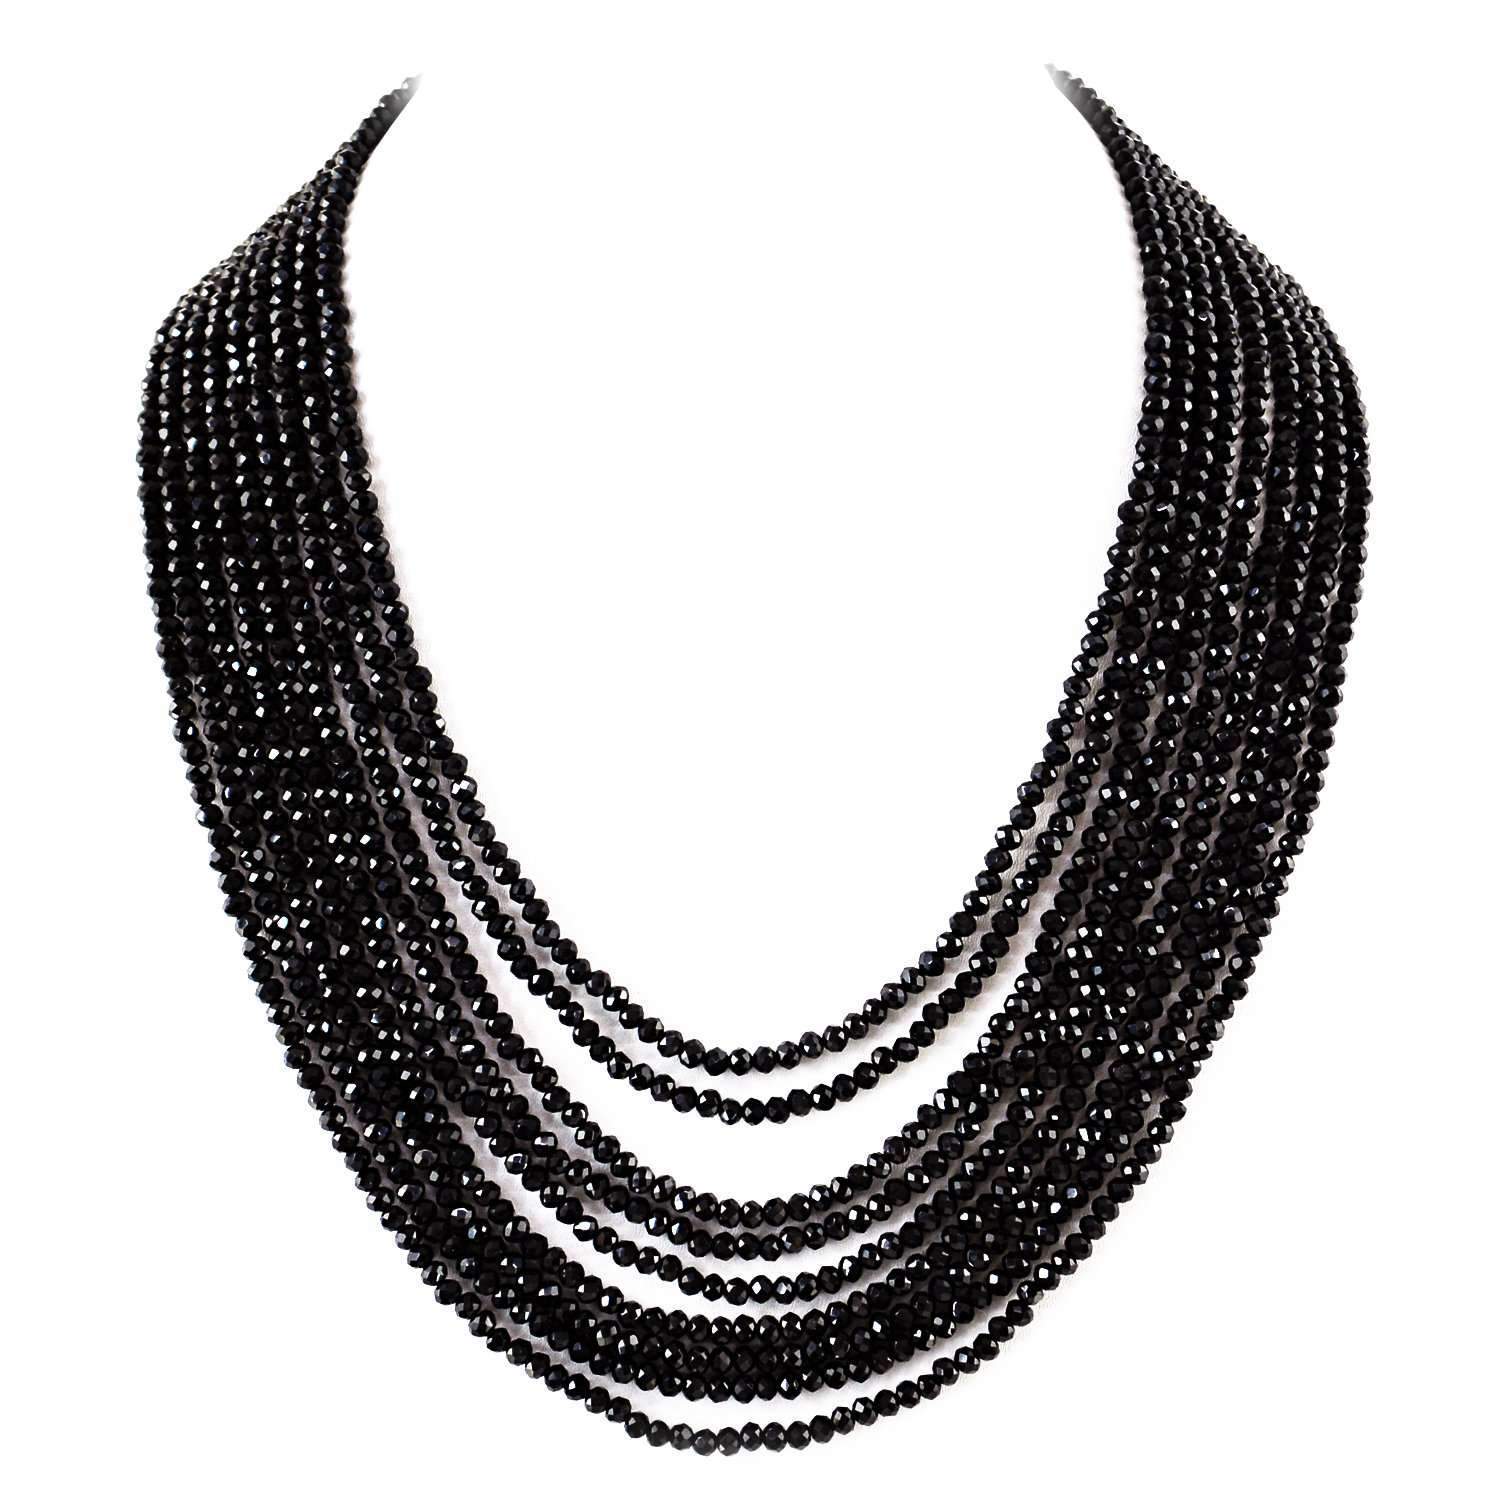 gemsmore:Natural Black Spinel Necklace 9 Strand Untreated Round Cut Beads